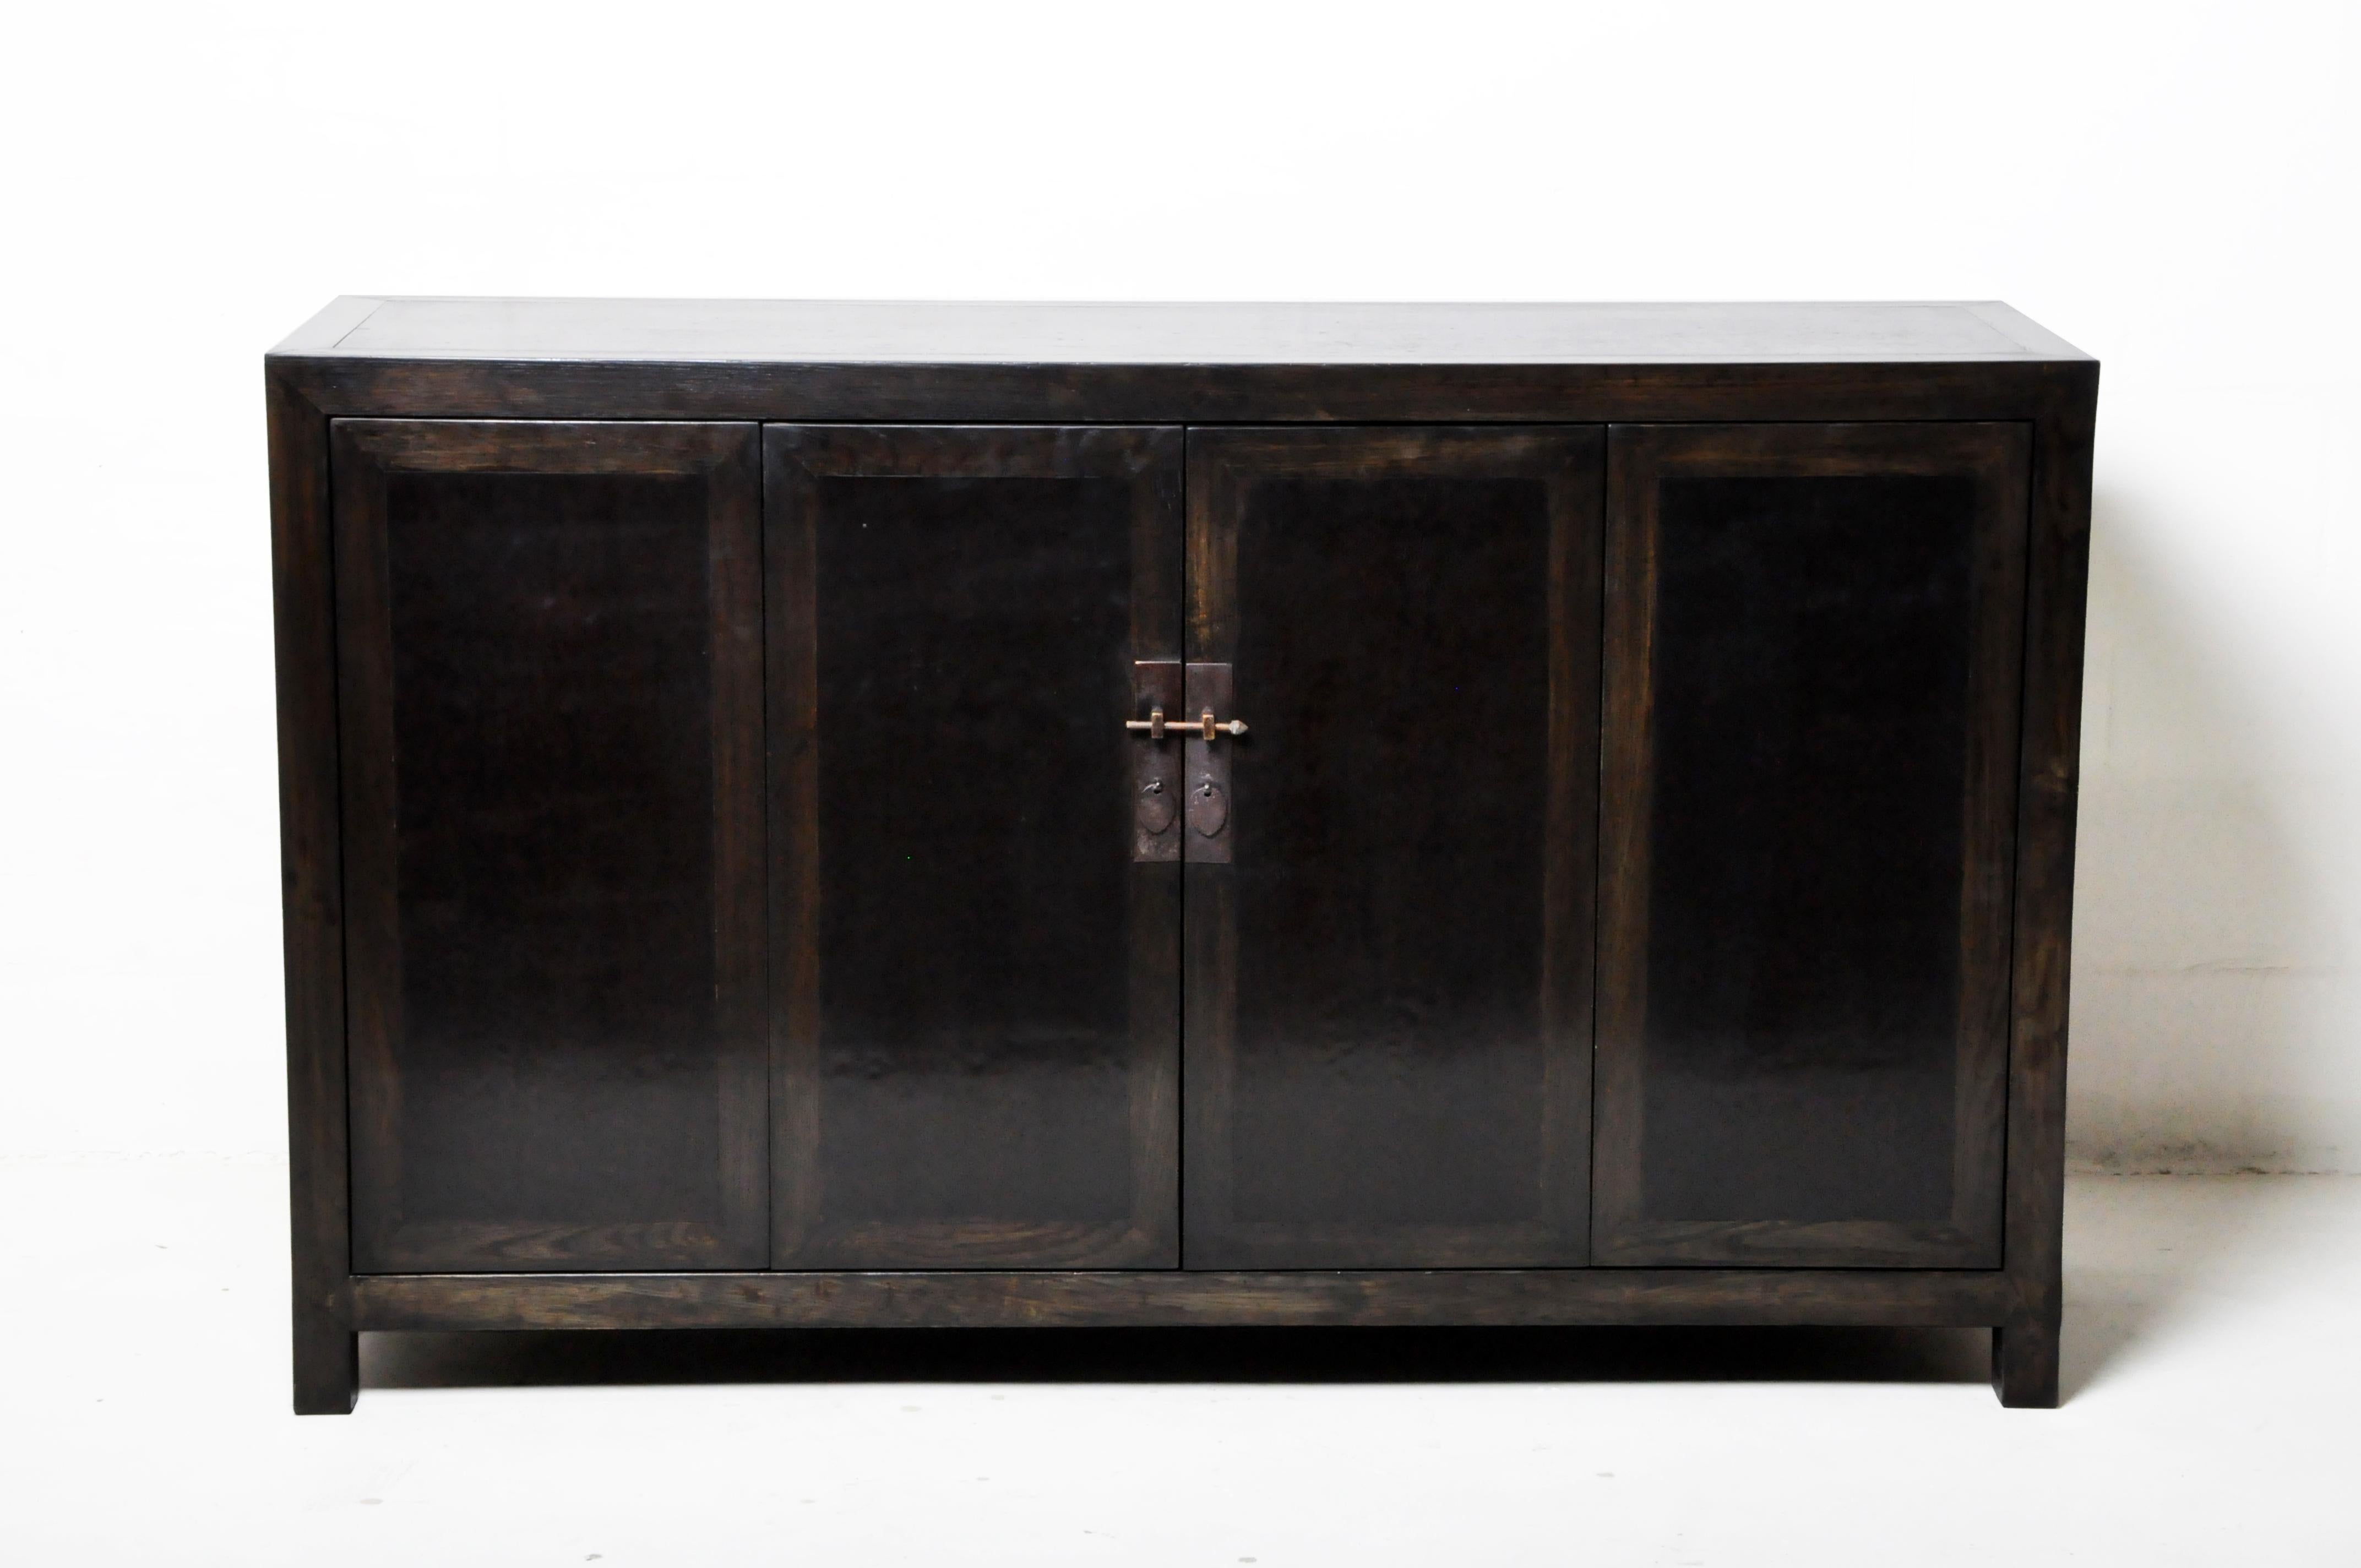 20th Century Chinese Sideboard with a Pair of Bi-Fold Doors